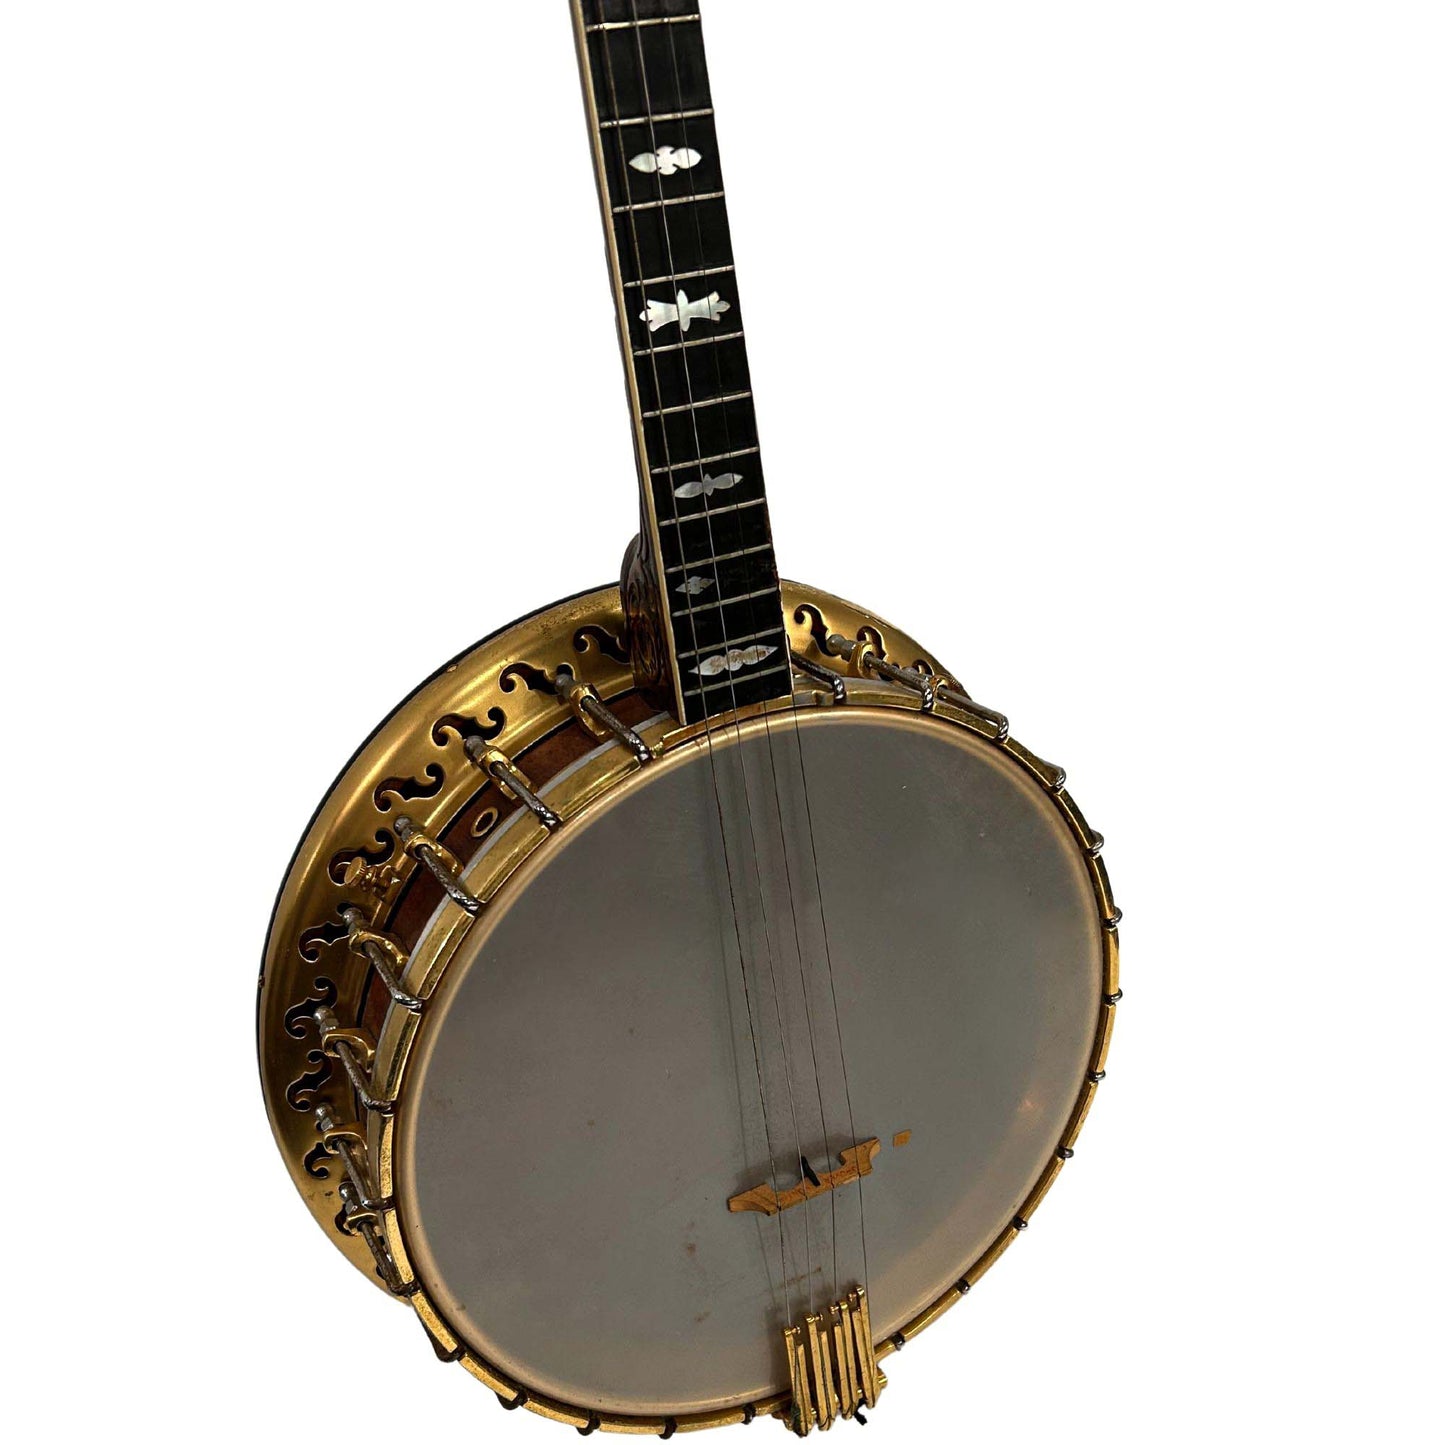 Bacon & Day Silver Bell Banjo Close Up View